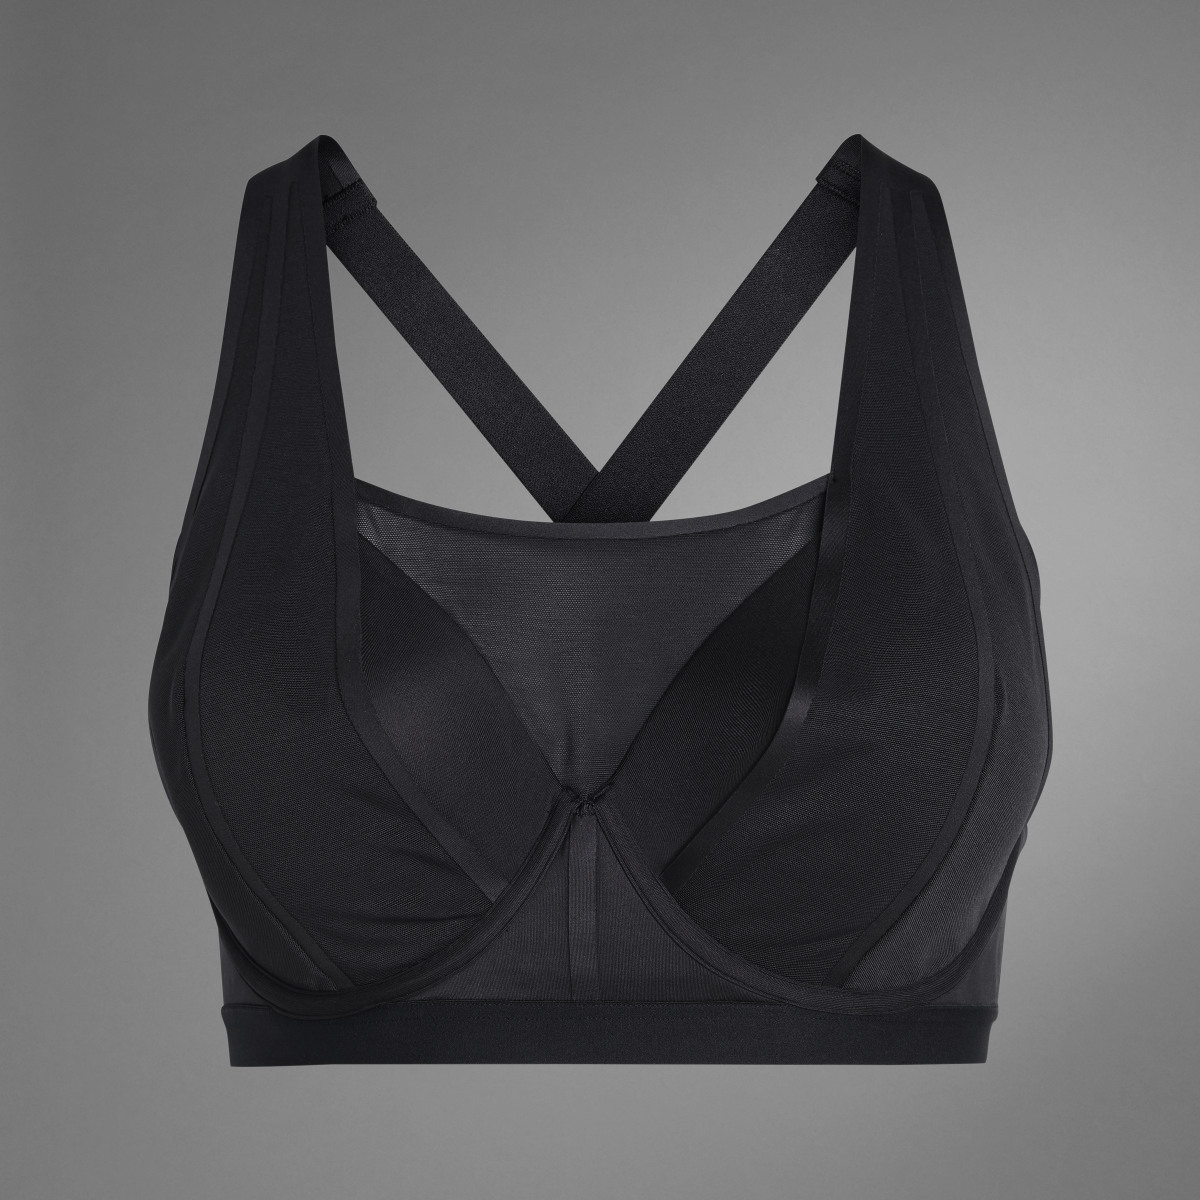 Adidas Brassière TLRD Impact Luxe Collective Power Maintien fort (Grandes tailles). 12